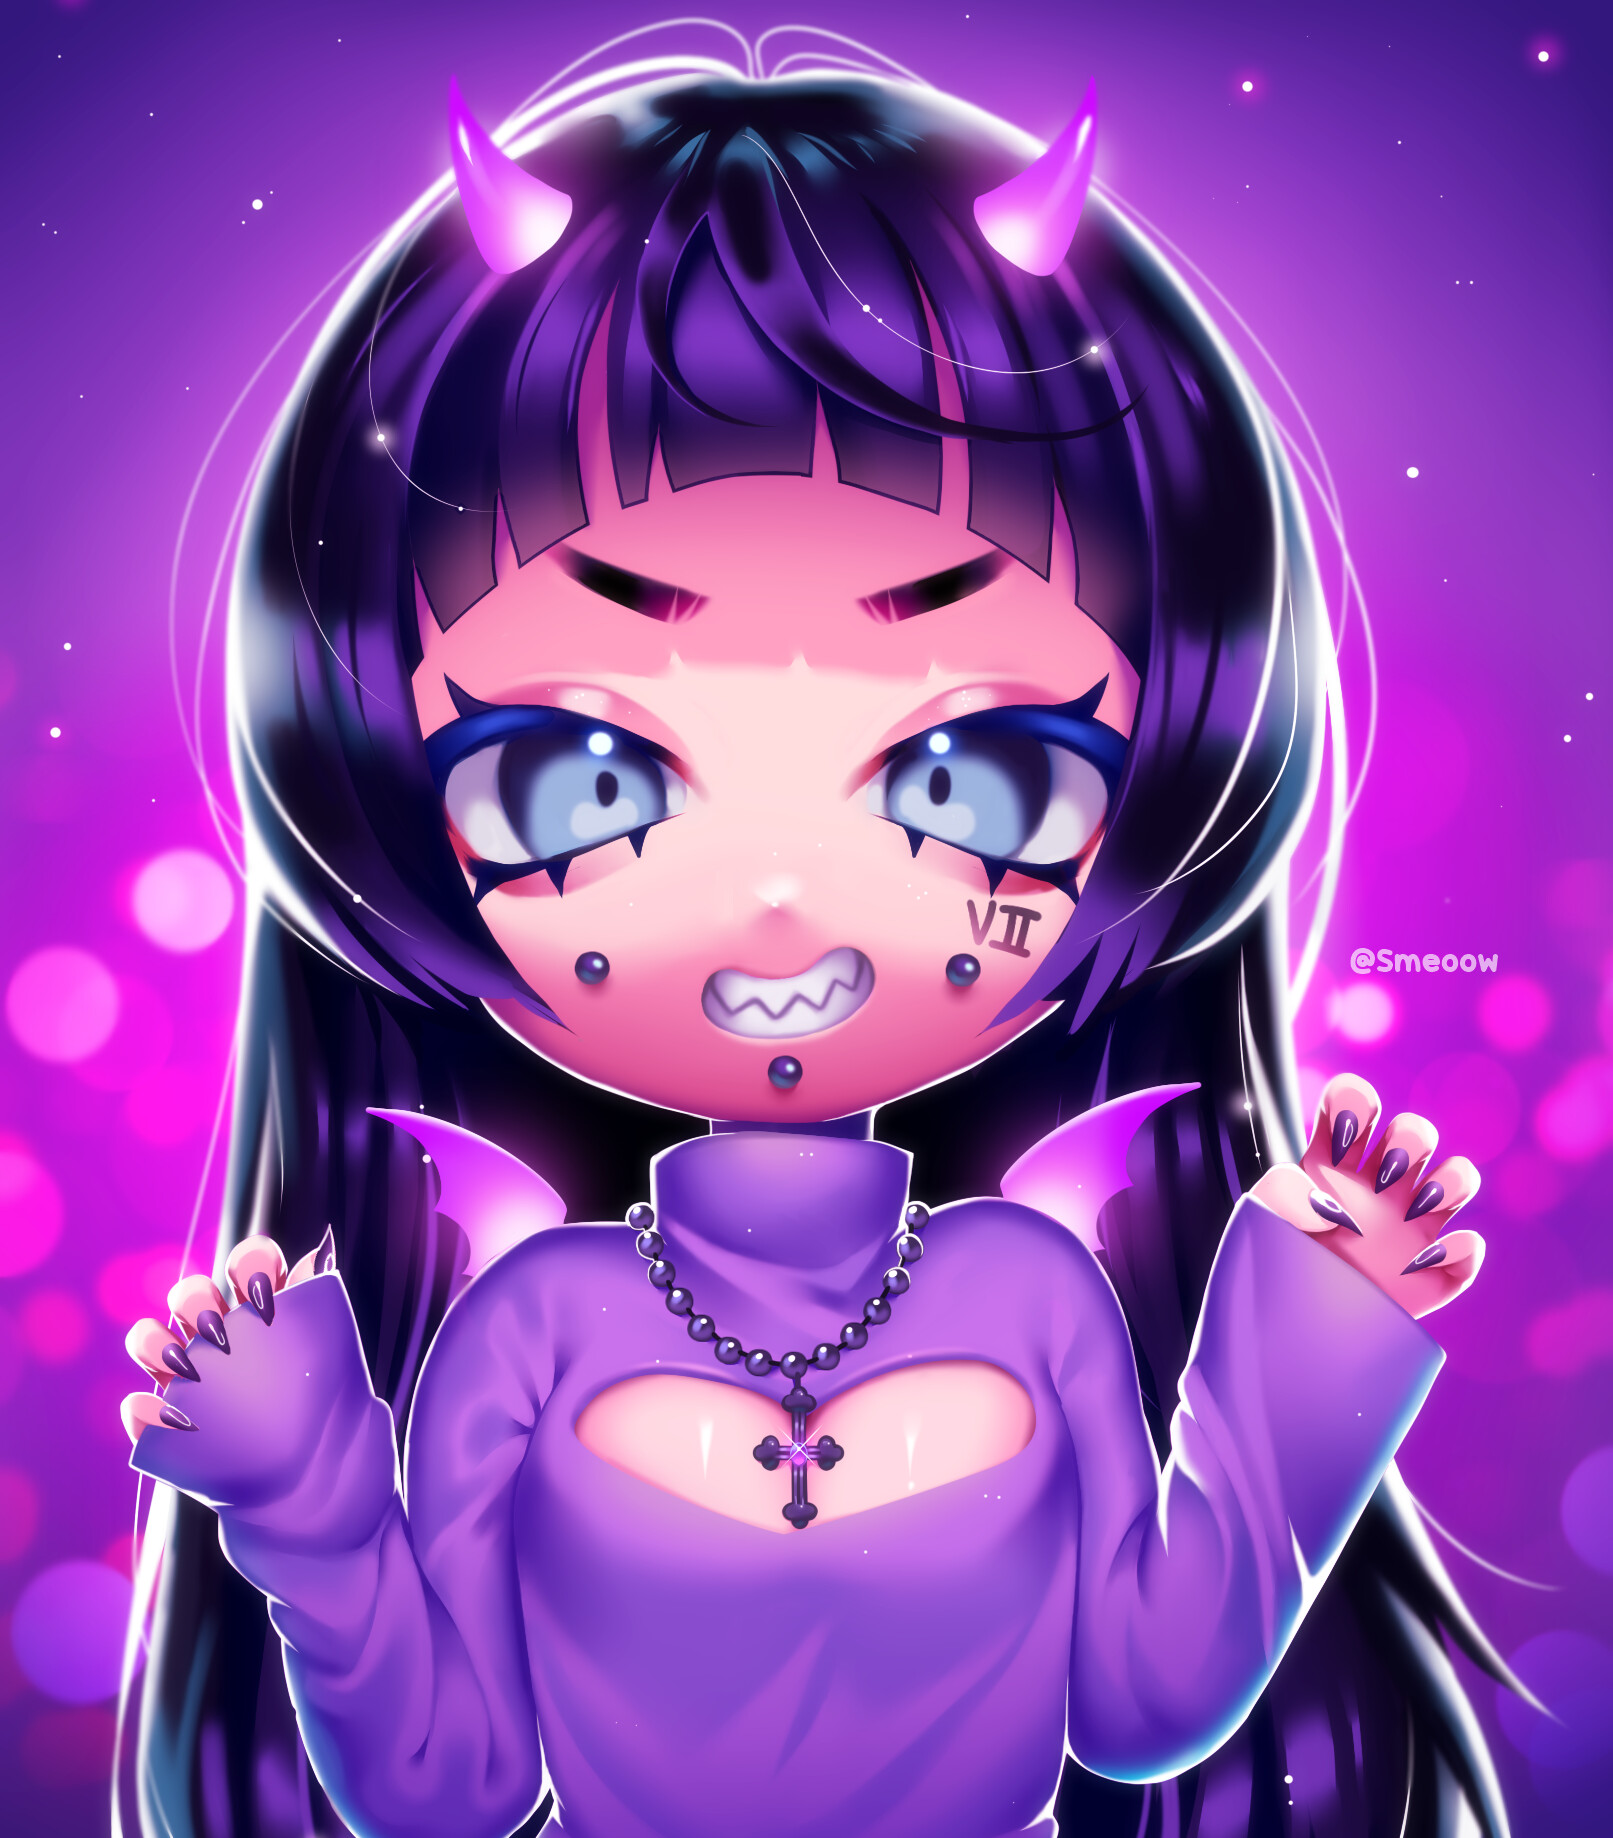 Download wallpaper 938x1668 demon, girl, horns, glance, anime, art, purple  iphone 8/7/6s/6 for parallax hd background